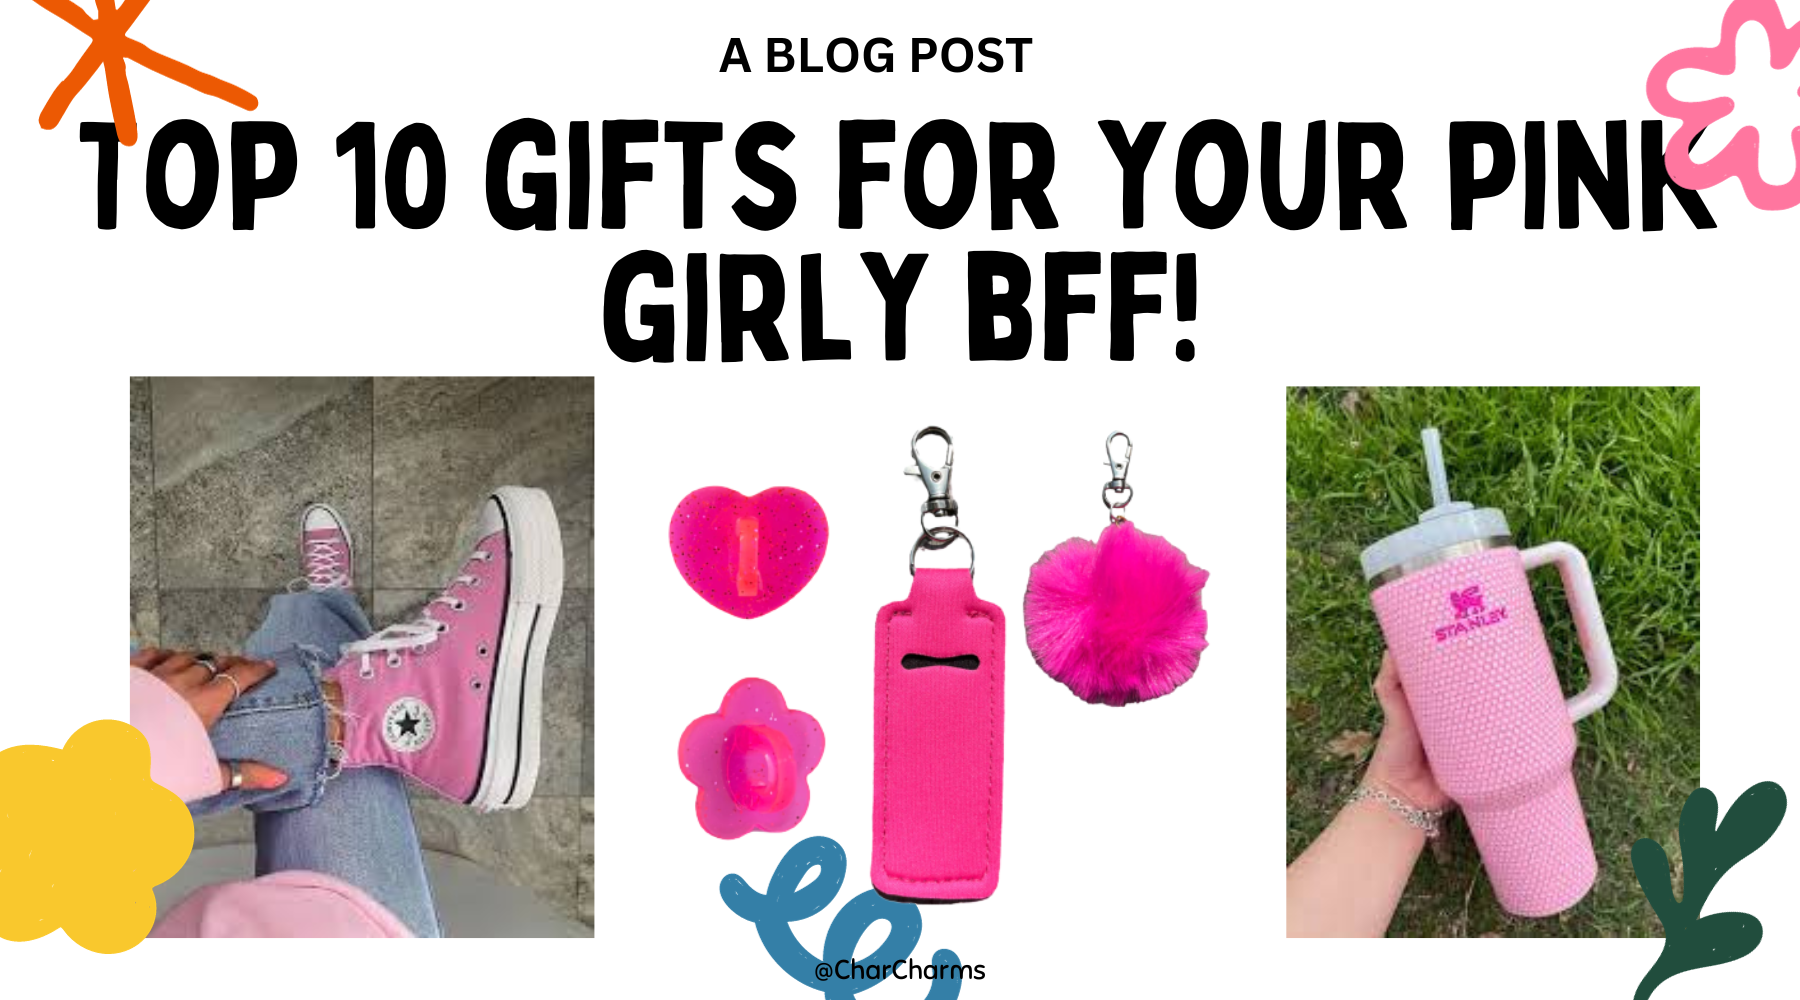 Top Ten Gifts For Your Pink Girly Best Friend